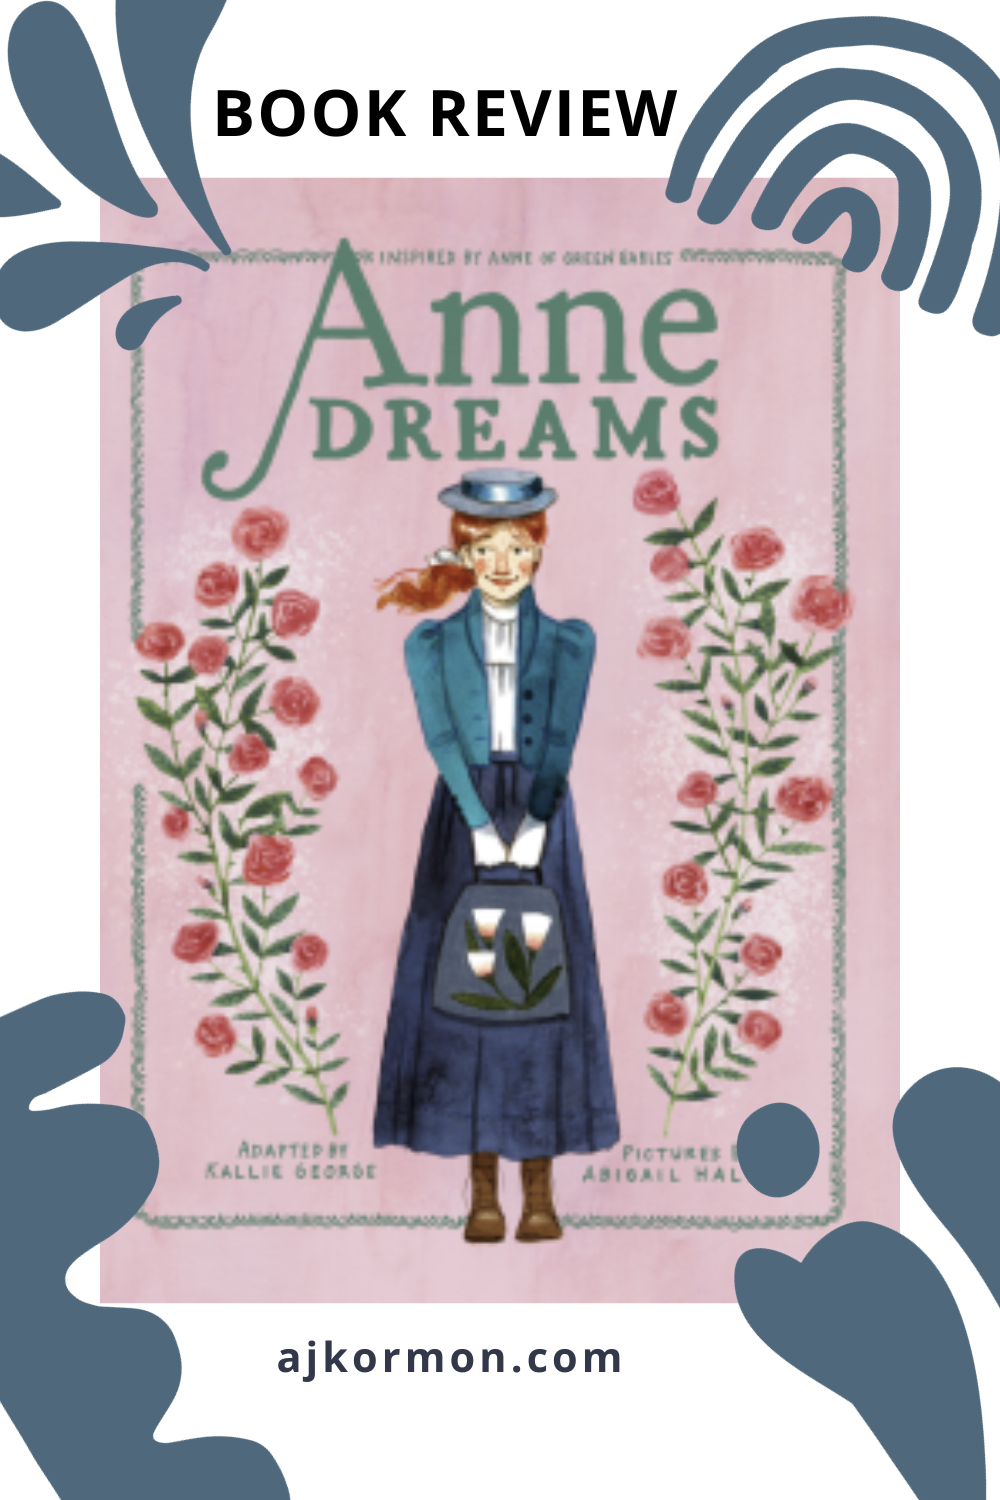 Book Review of Anne Dreams by Kallie George